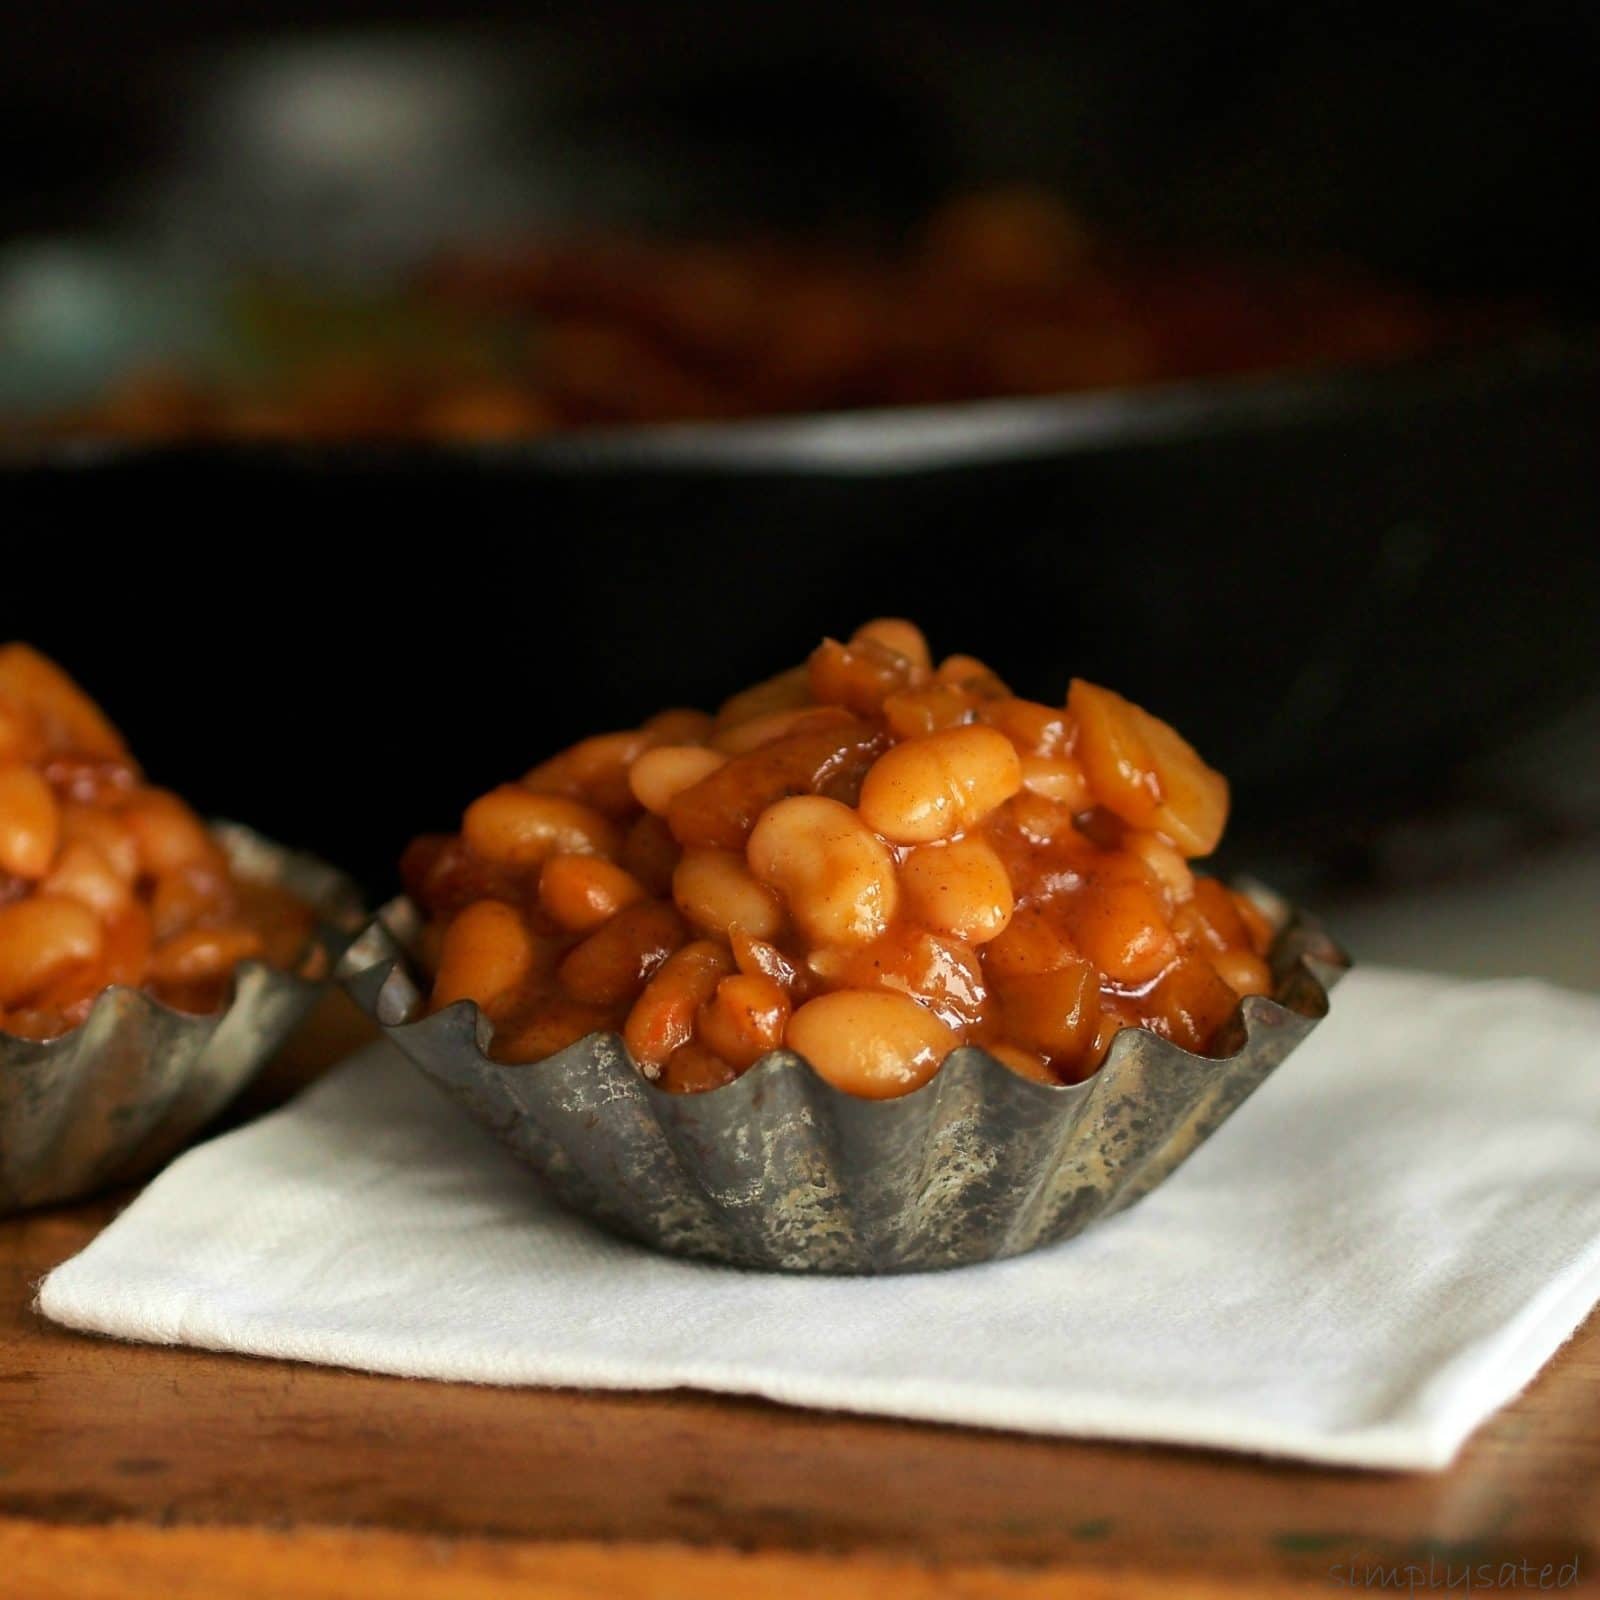 Apple Brown Sugar Baked Beans are one of the best two baked beans recipes - ever! simplysated